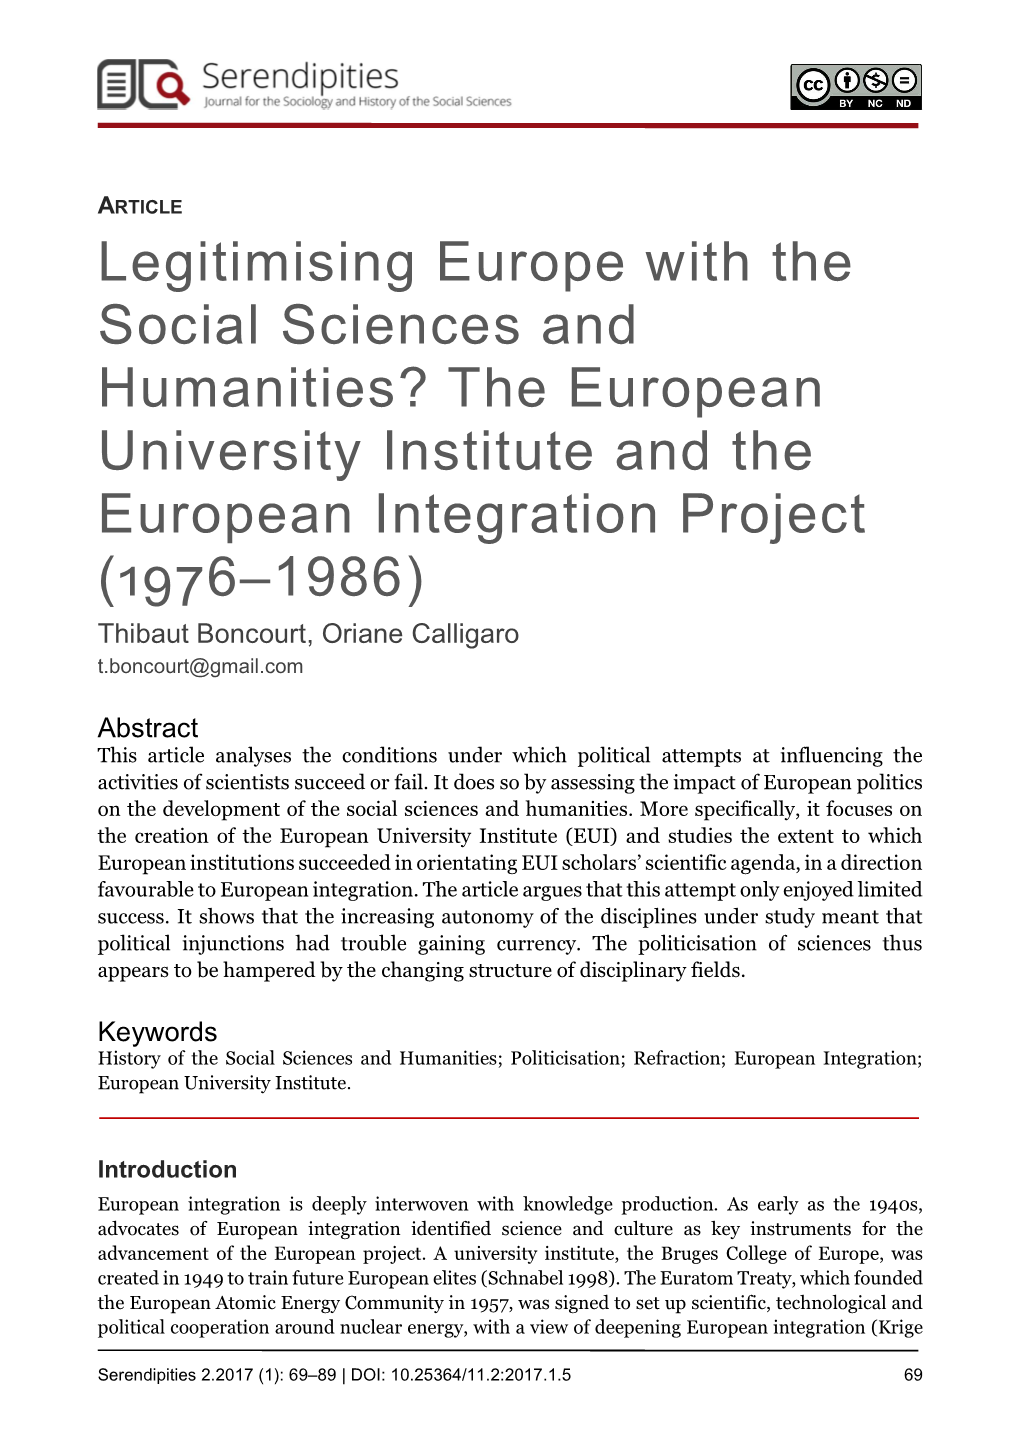 Legitimising Europe with the Social Sciences and Humanities? The